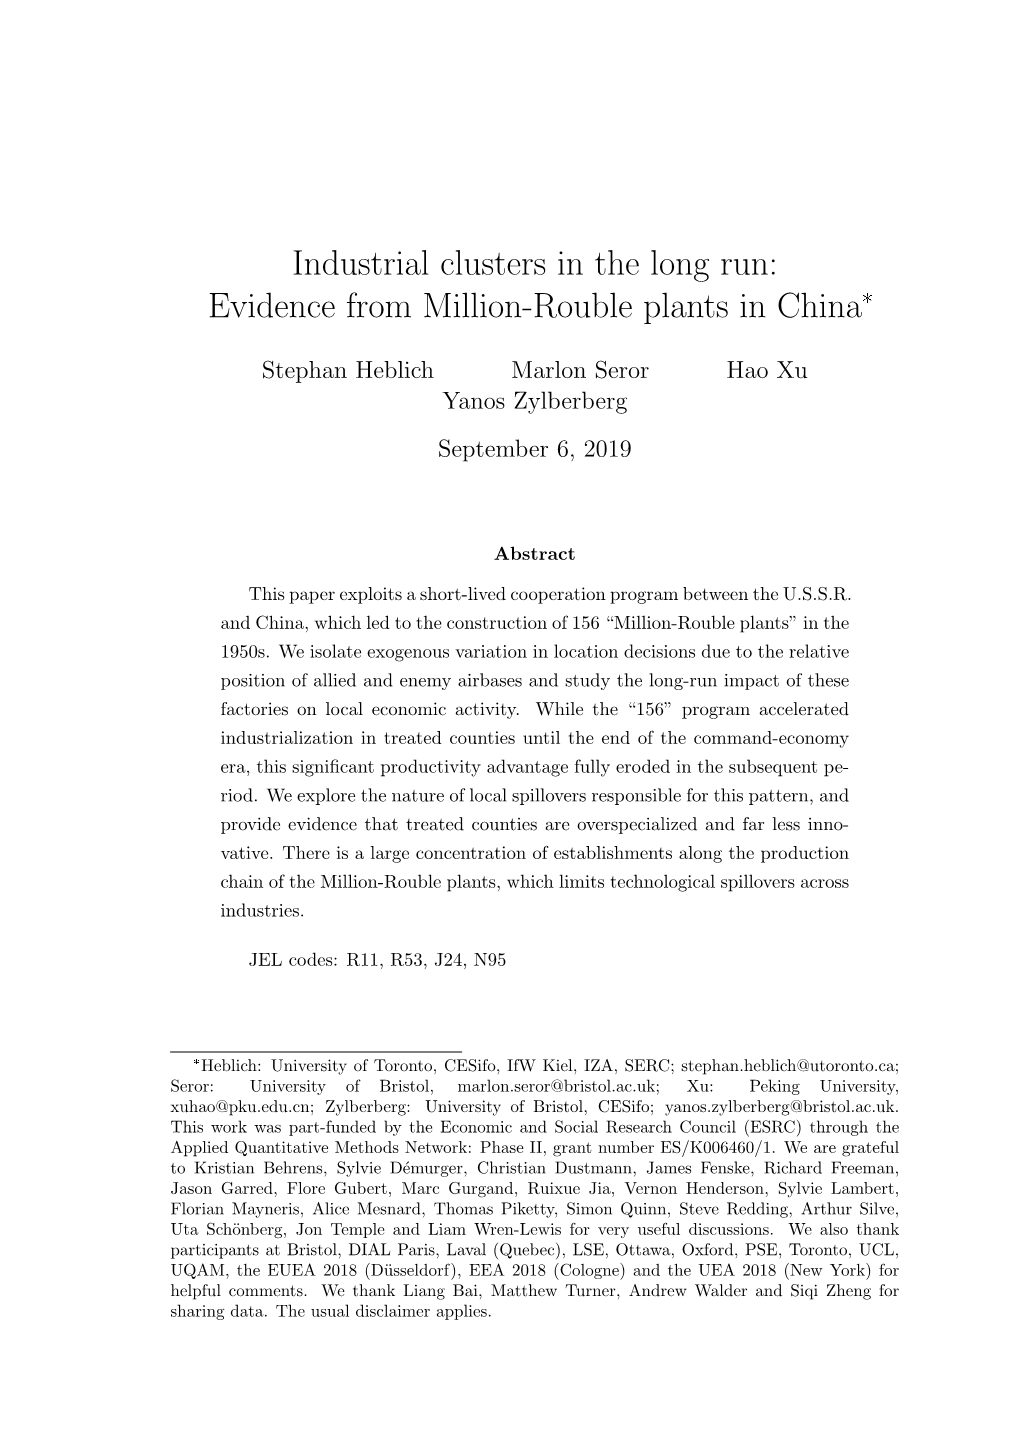 Industrial Clusters in the Long Run: Evidence from Million-Rouble Plants in China*